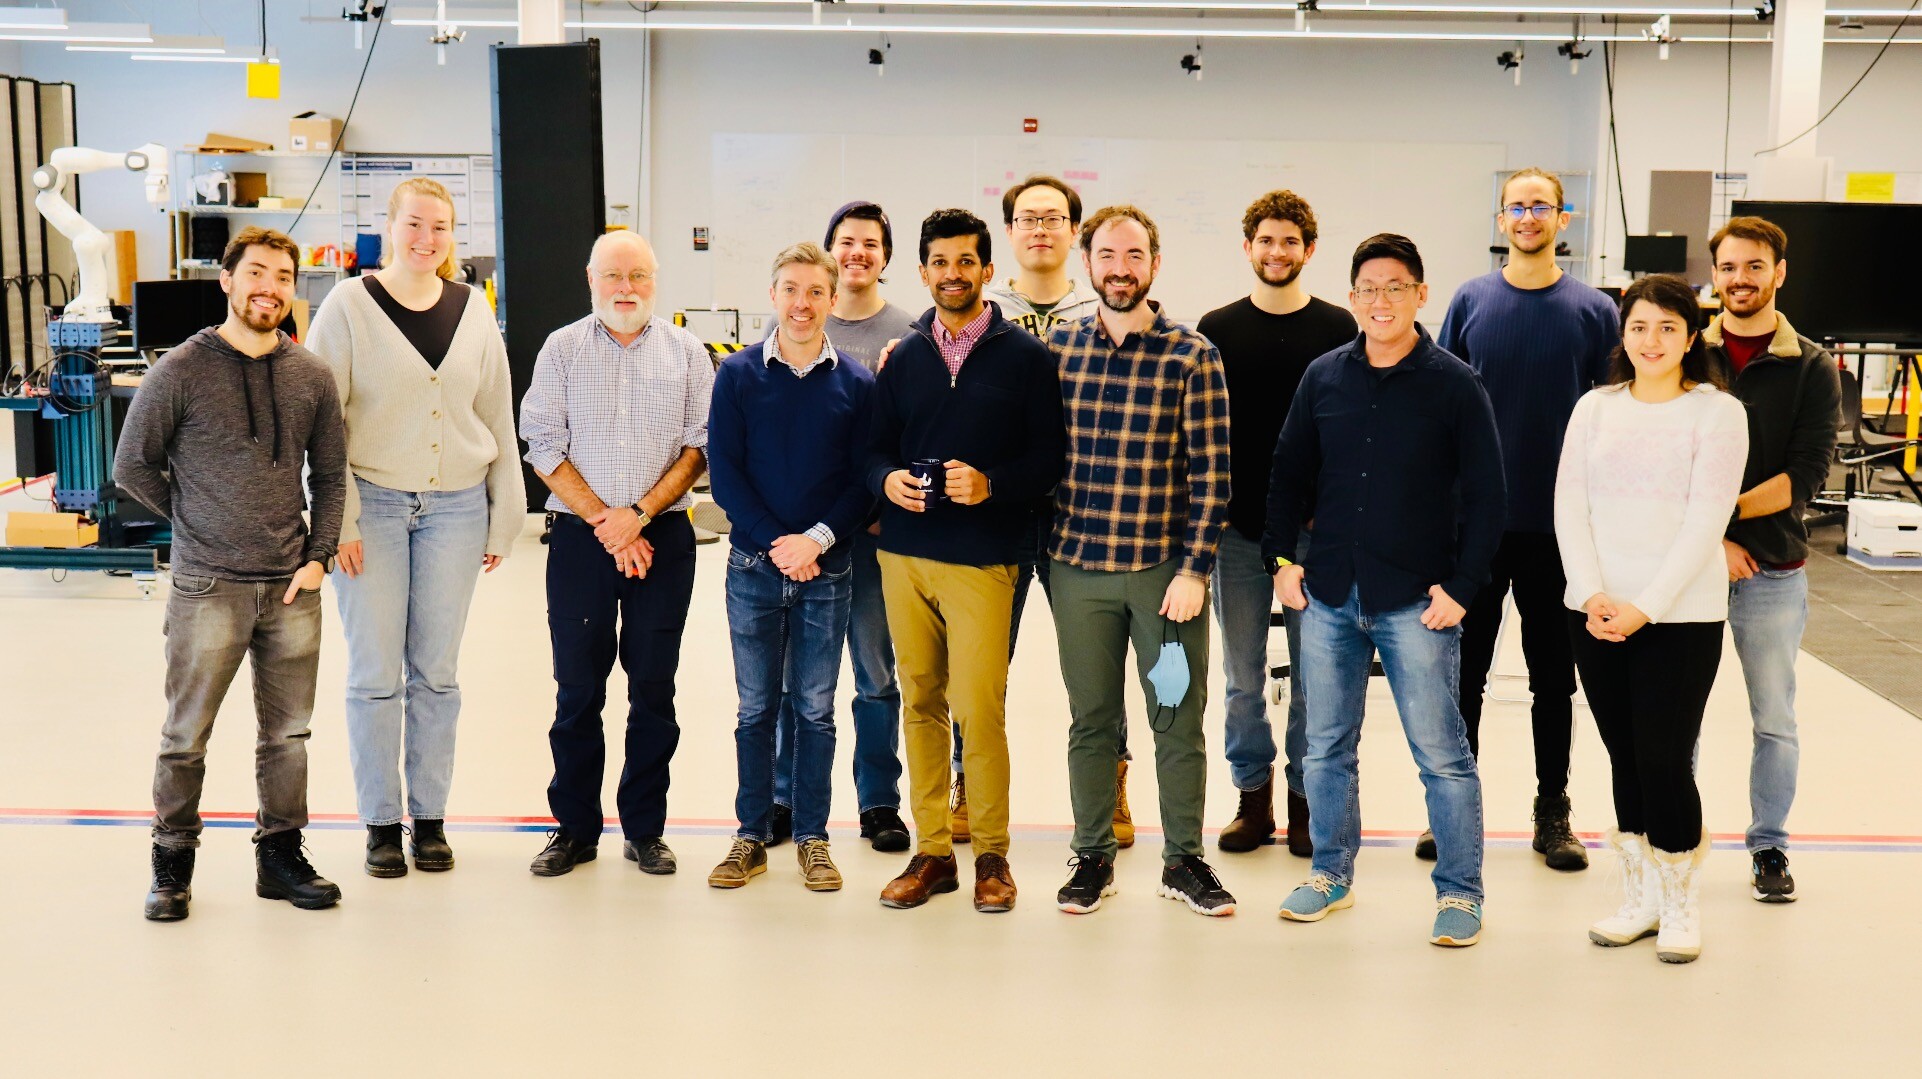 Offroad Robotics and Ingenuity Labs researchers gathered to celebrate the accomplishments of Dr. Heshan Fernando who is moving on to a new position at FP Innovations.